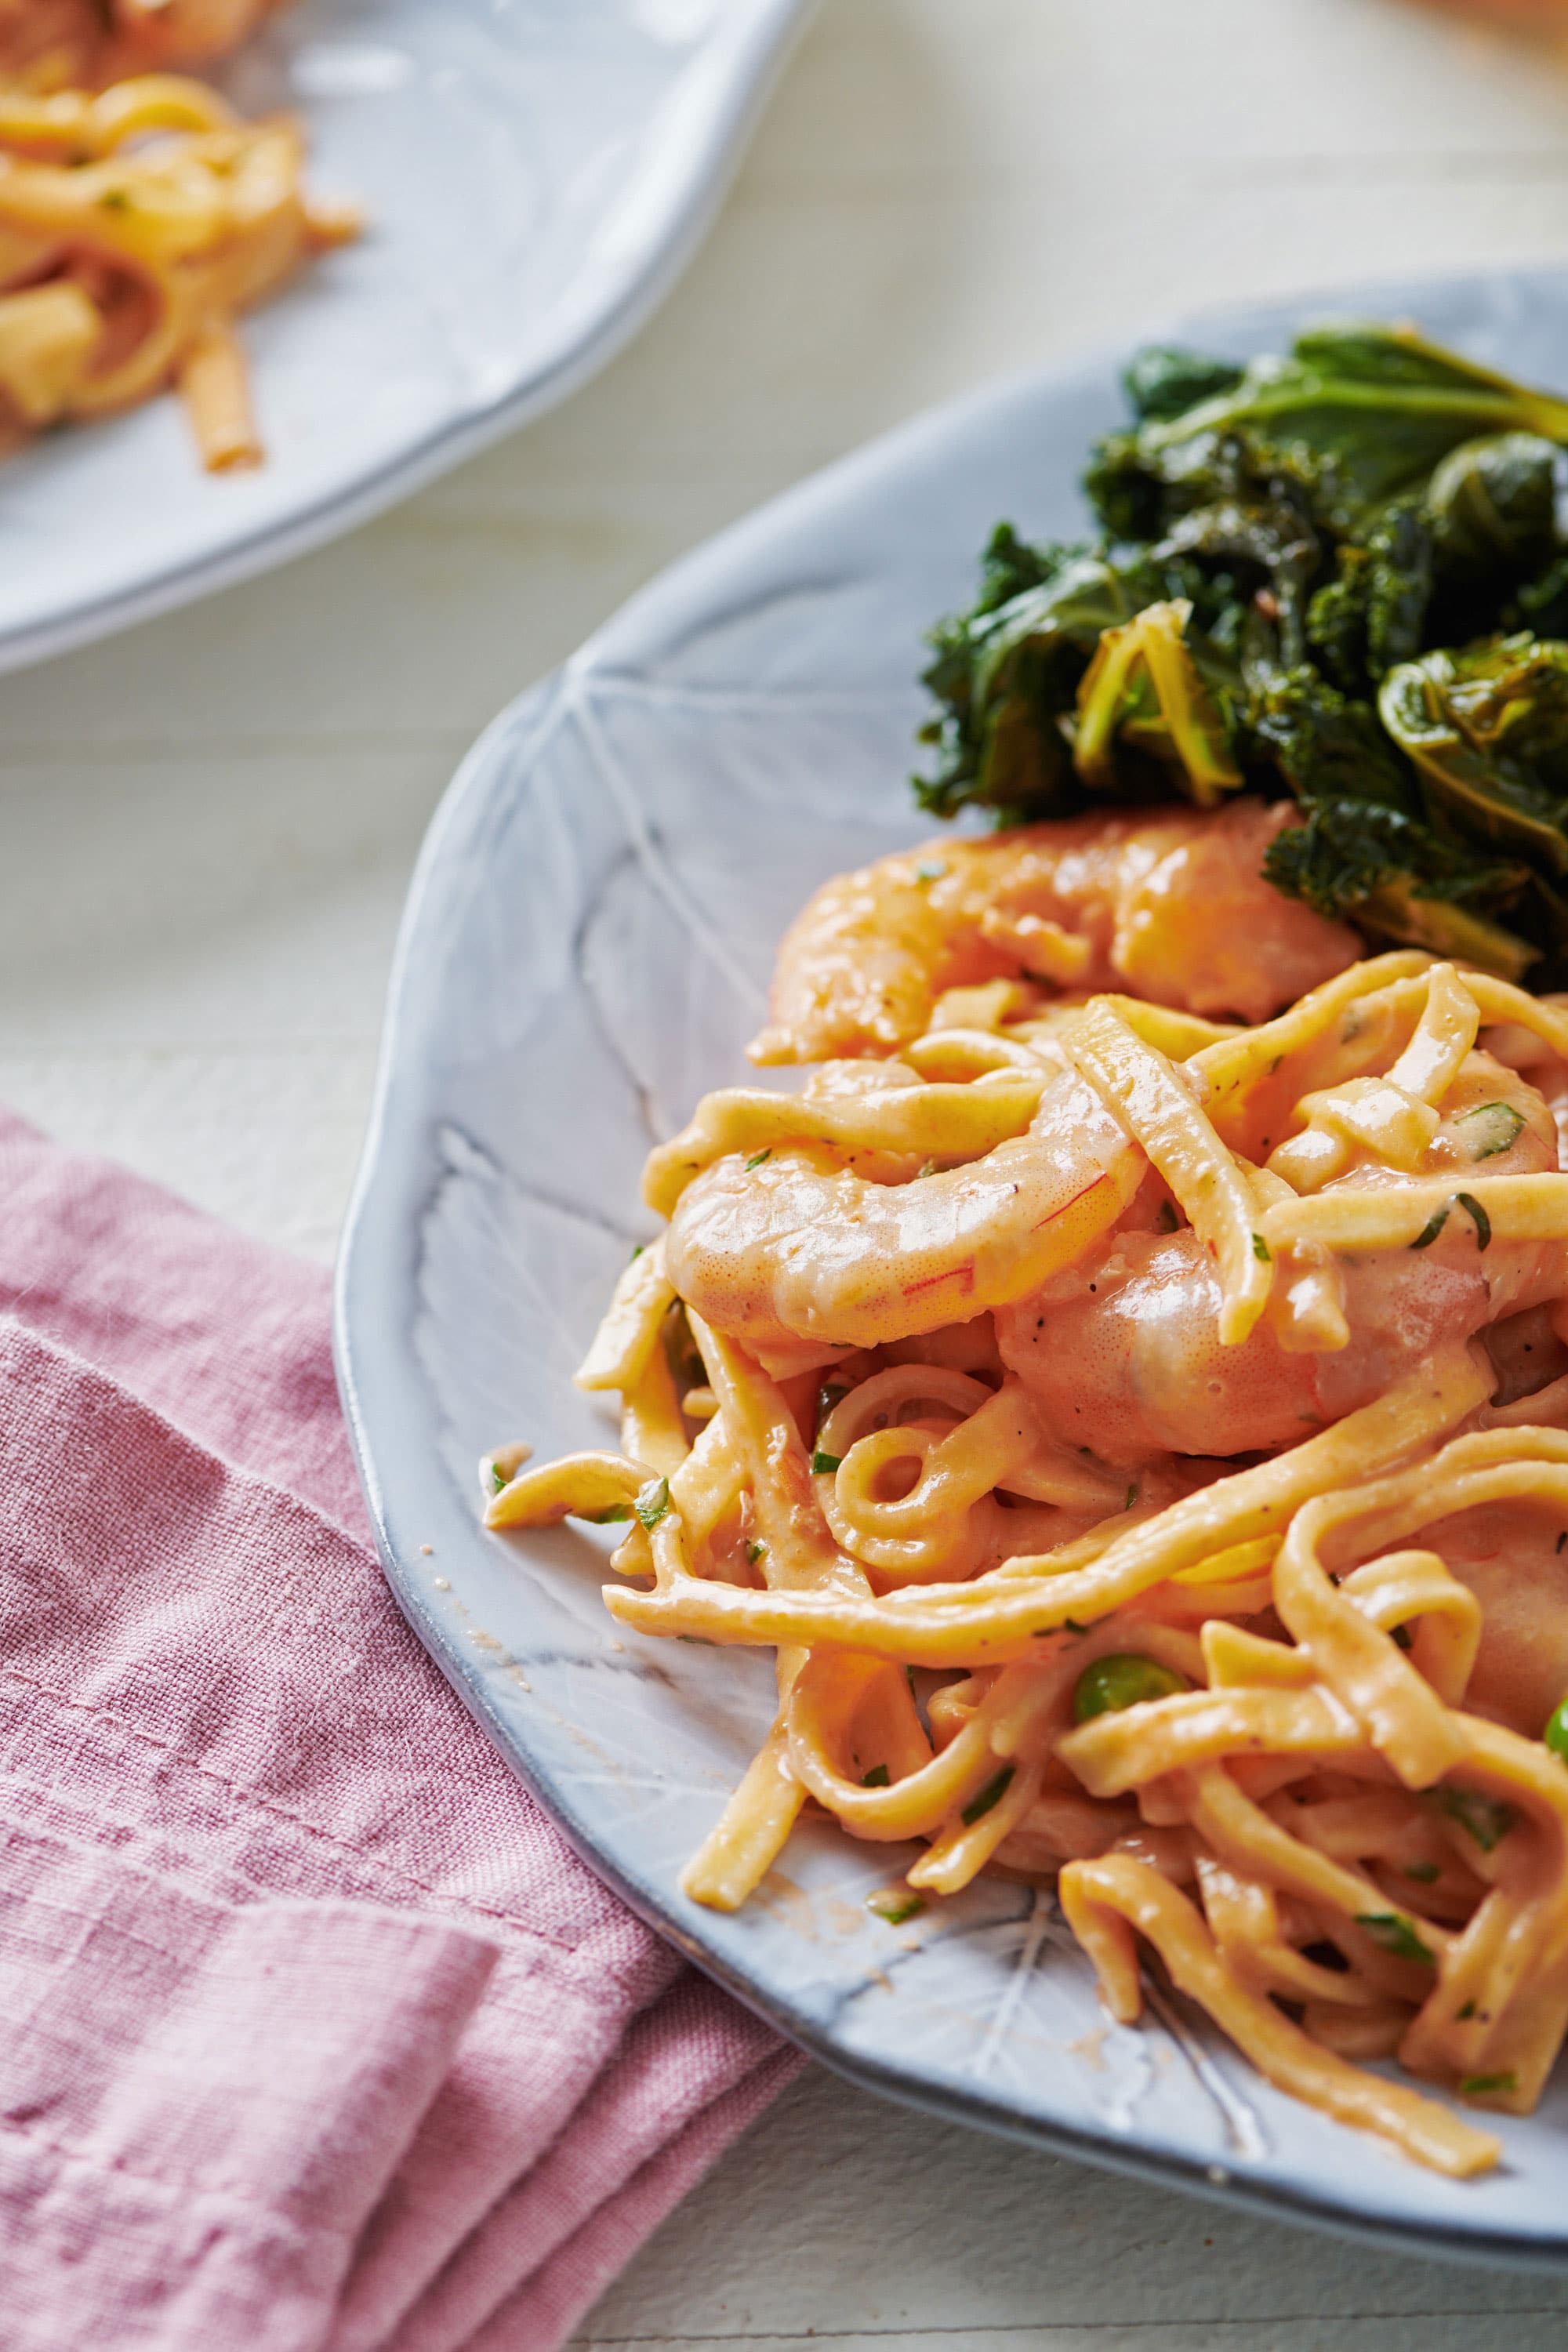 Plate with fresh linguine with shrimp and peas in a pink cream sauce and greens.